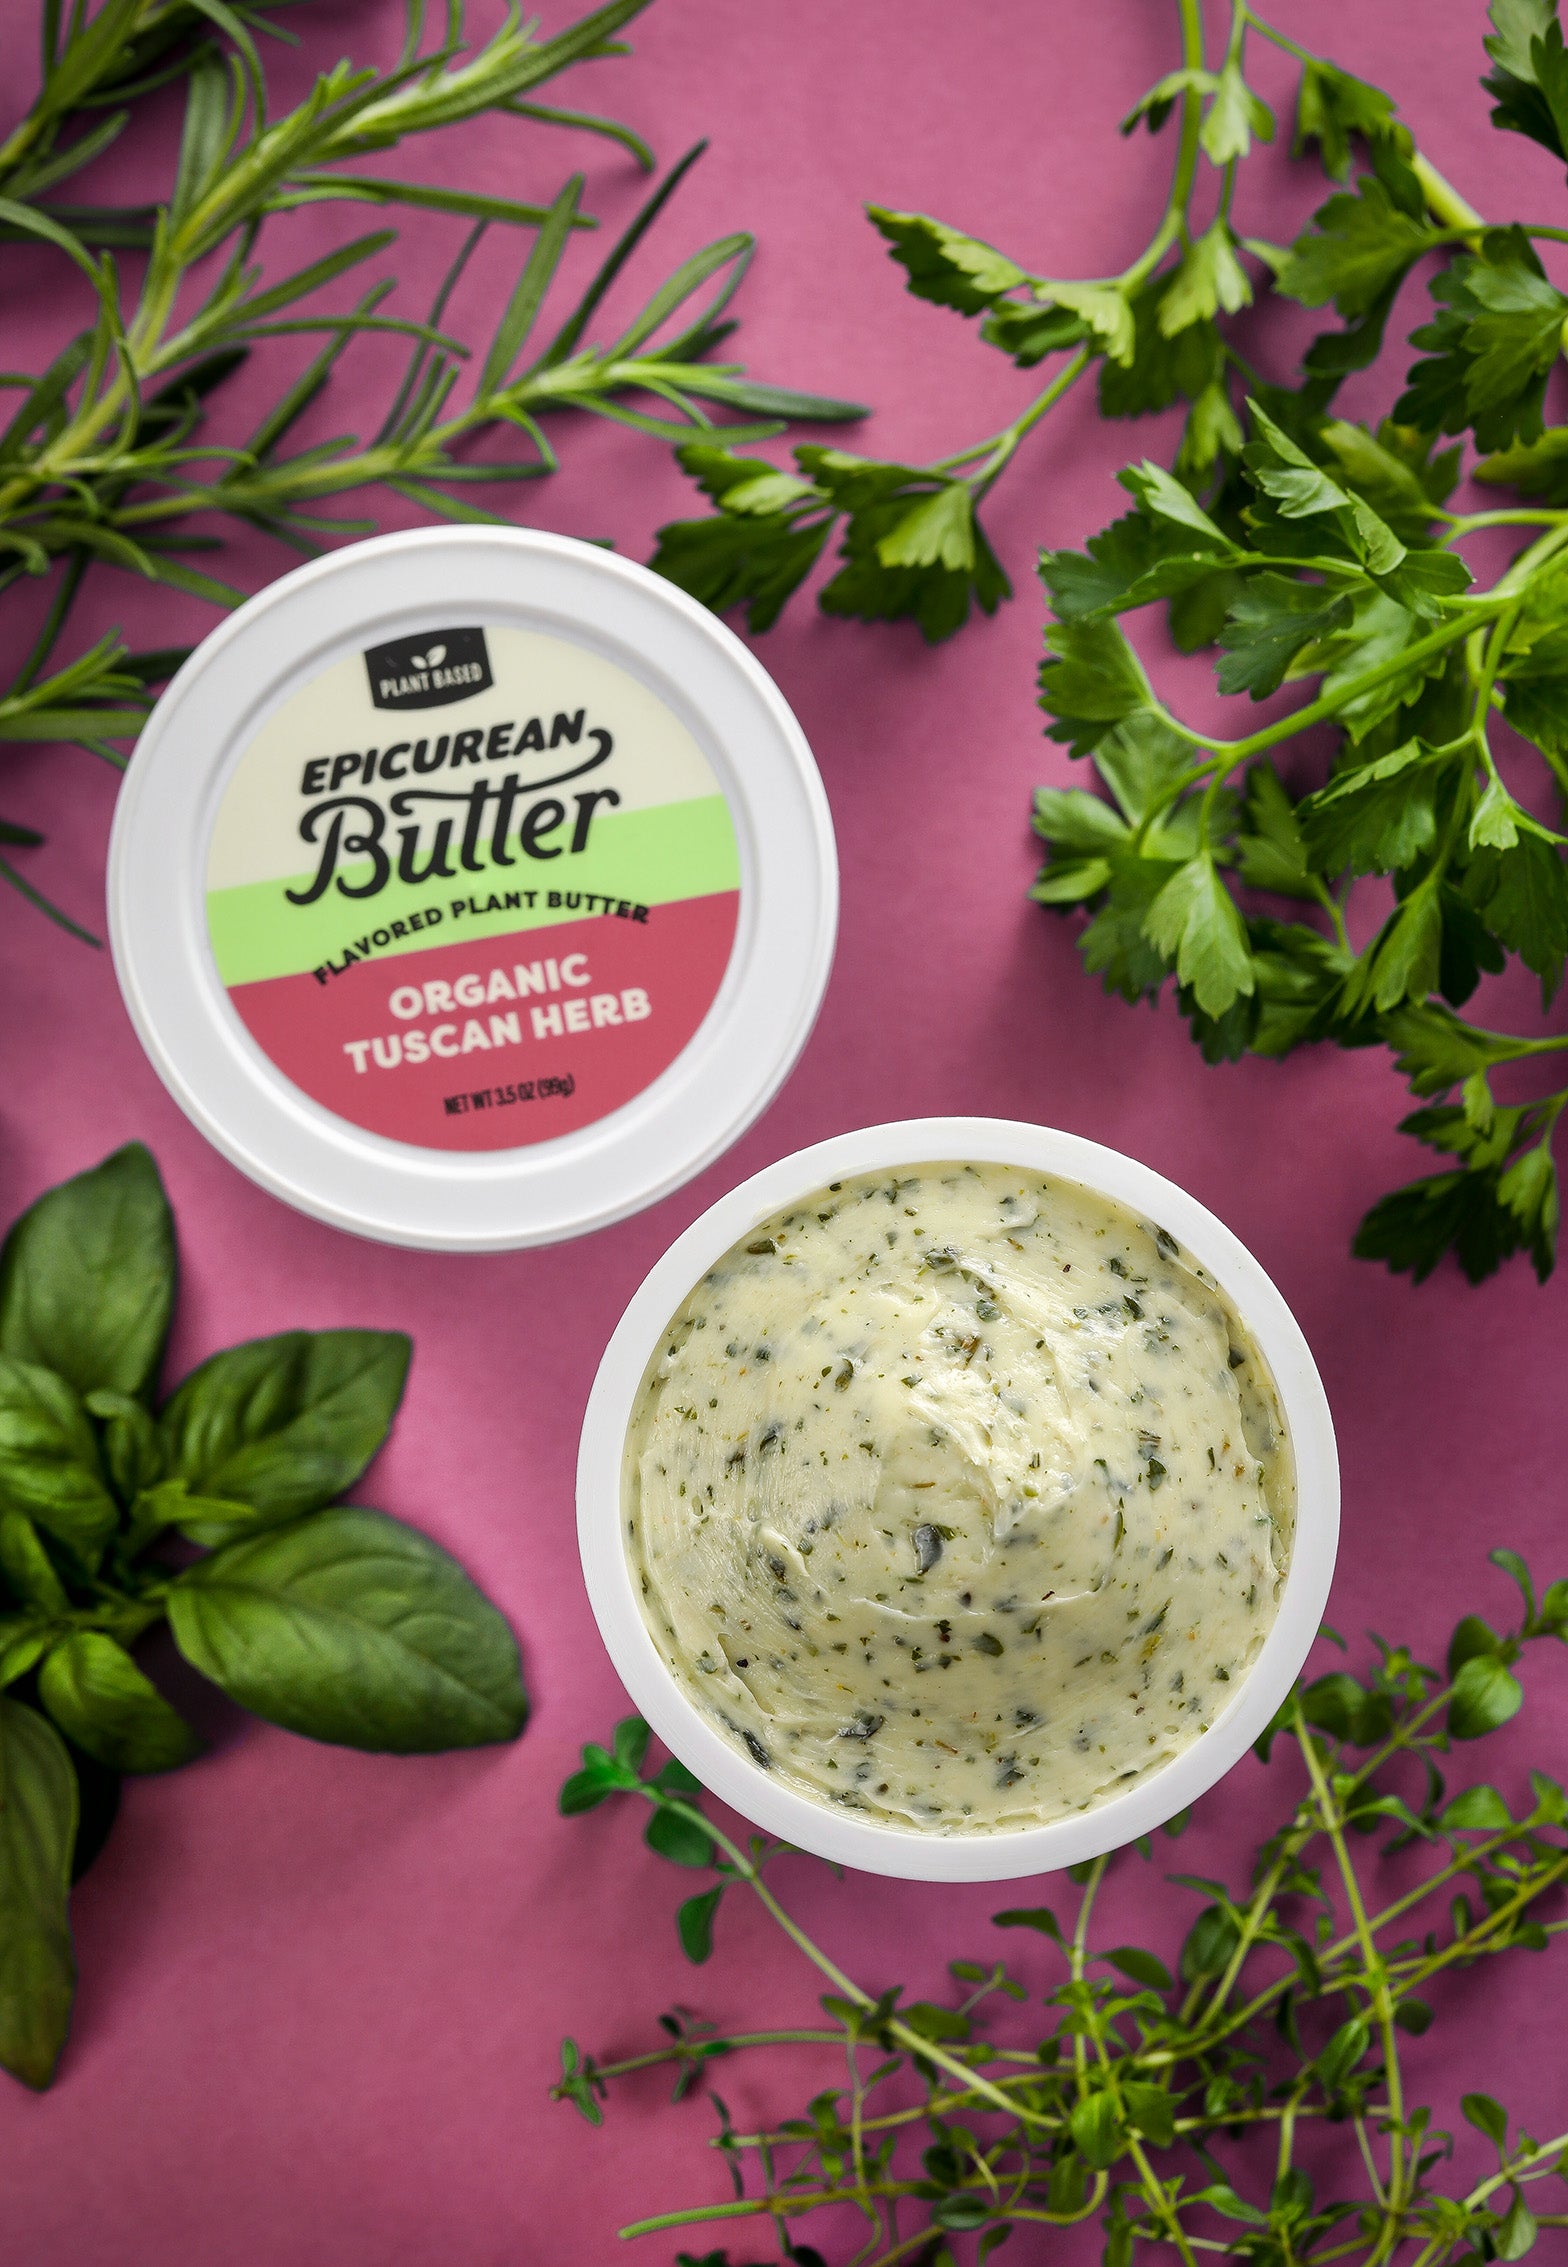 Organic Tuscan Herb Flavored Plant Butter tub with ingredients